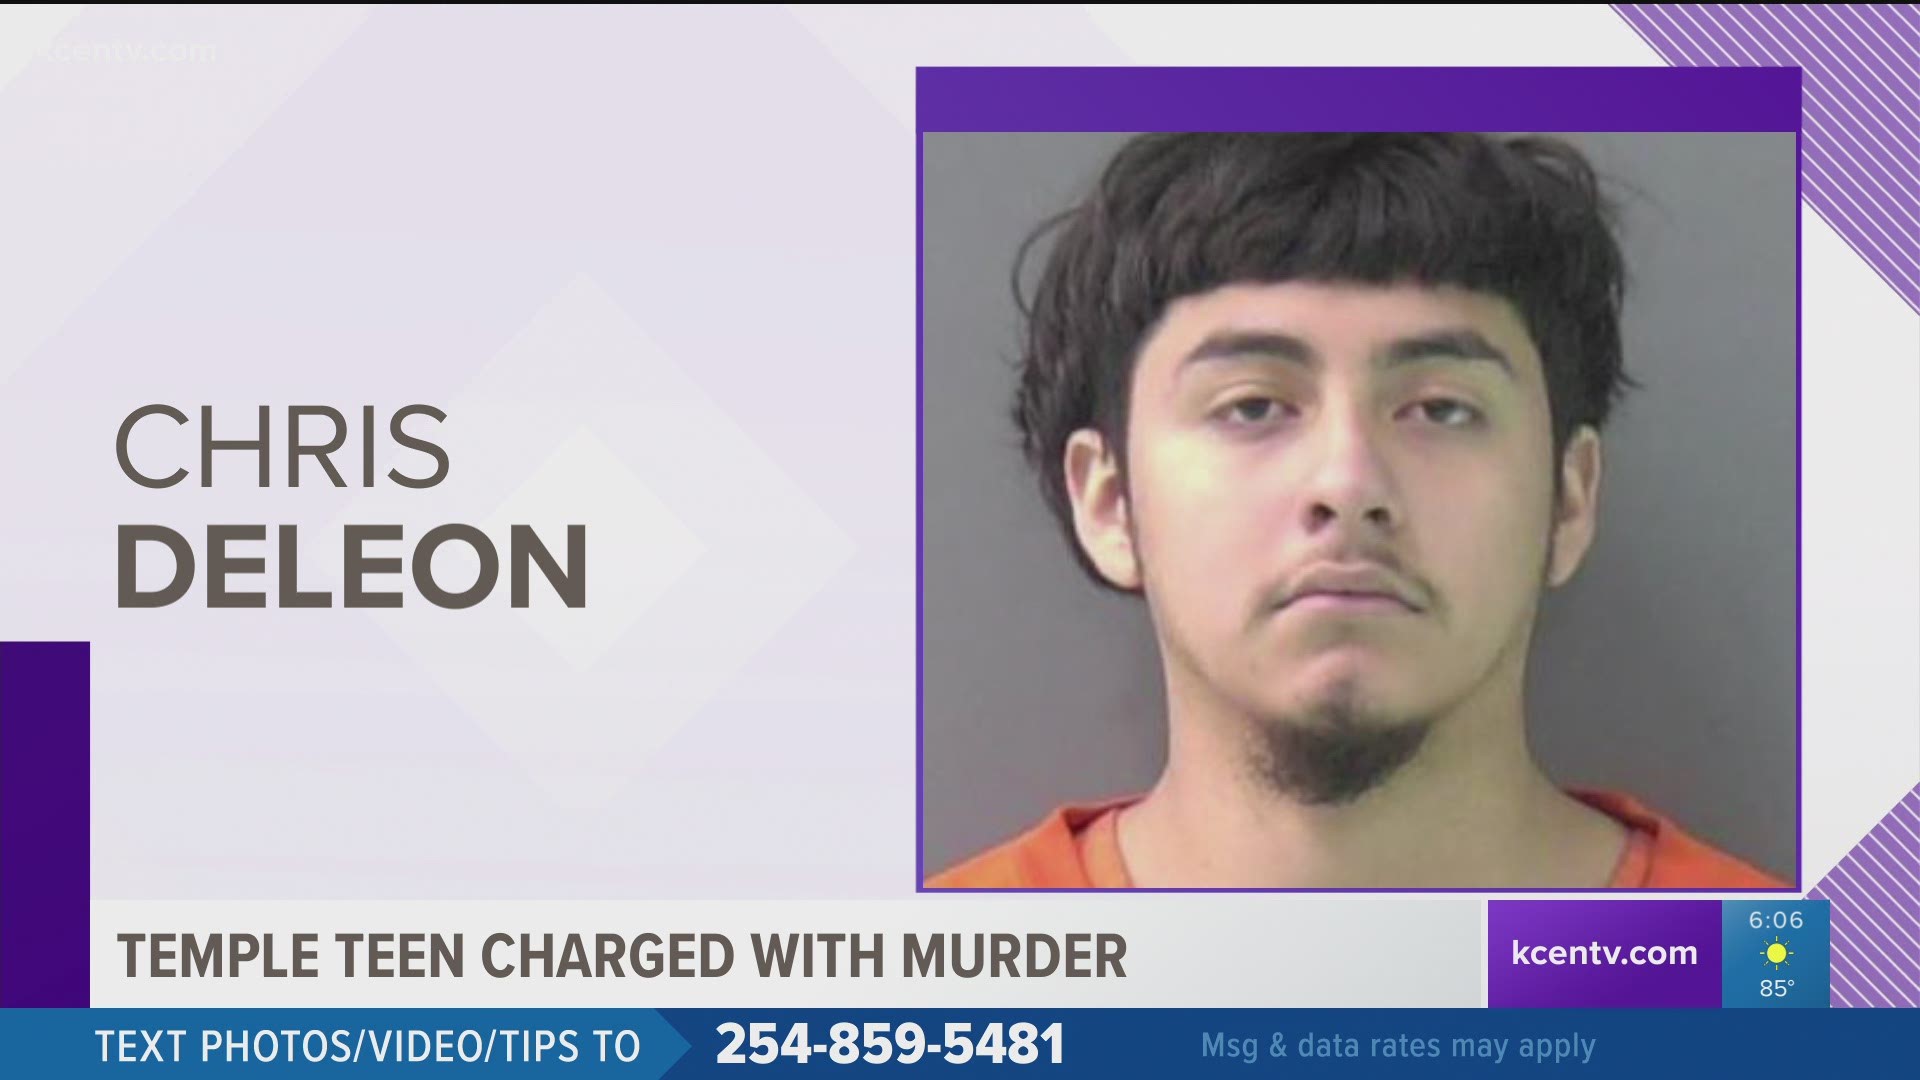 Chris DeLeon, 18, was charged with murder in connection to the death of 19-year-old Claire Hernandez, police say.